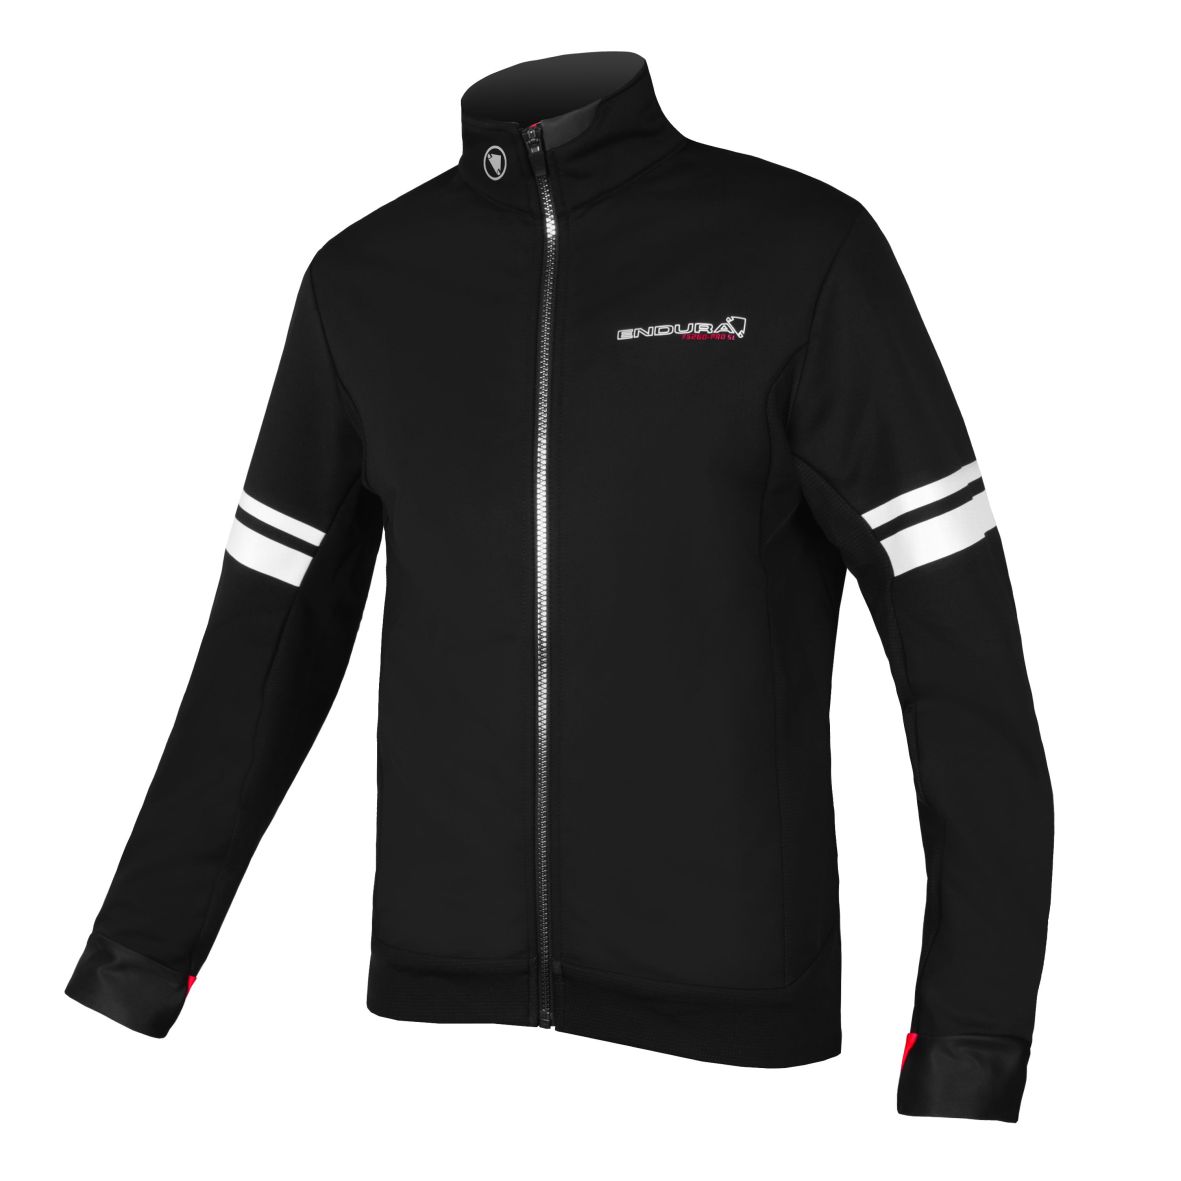 Endura's new thermal wind jacket inspired by pro team kit | Bicycle ...